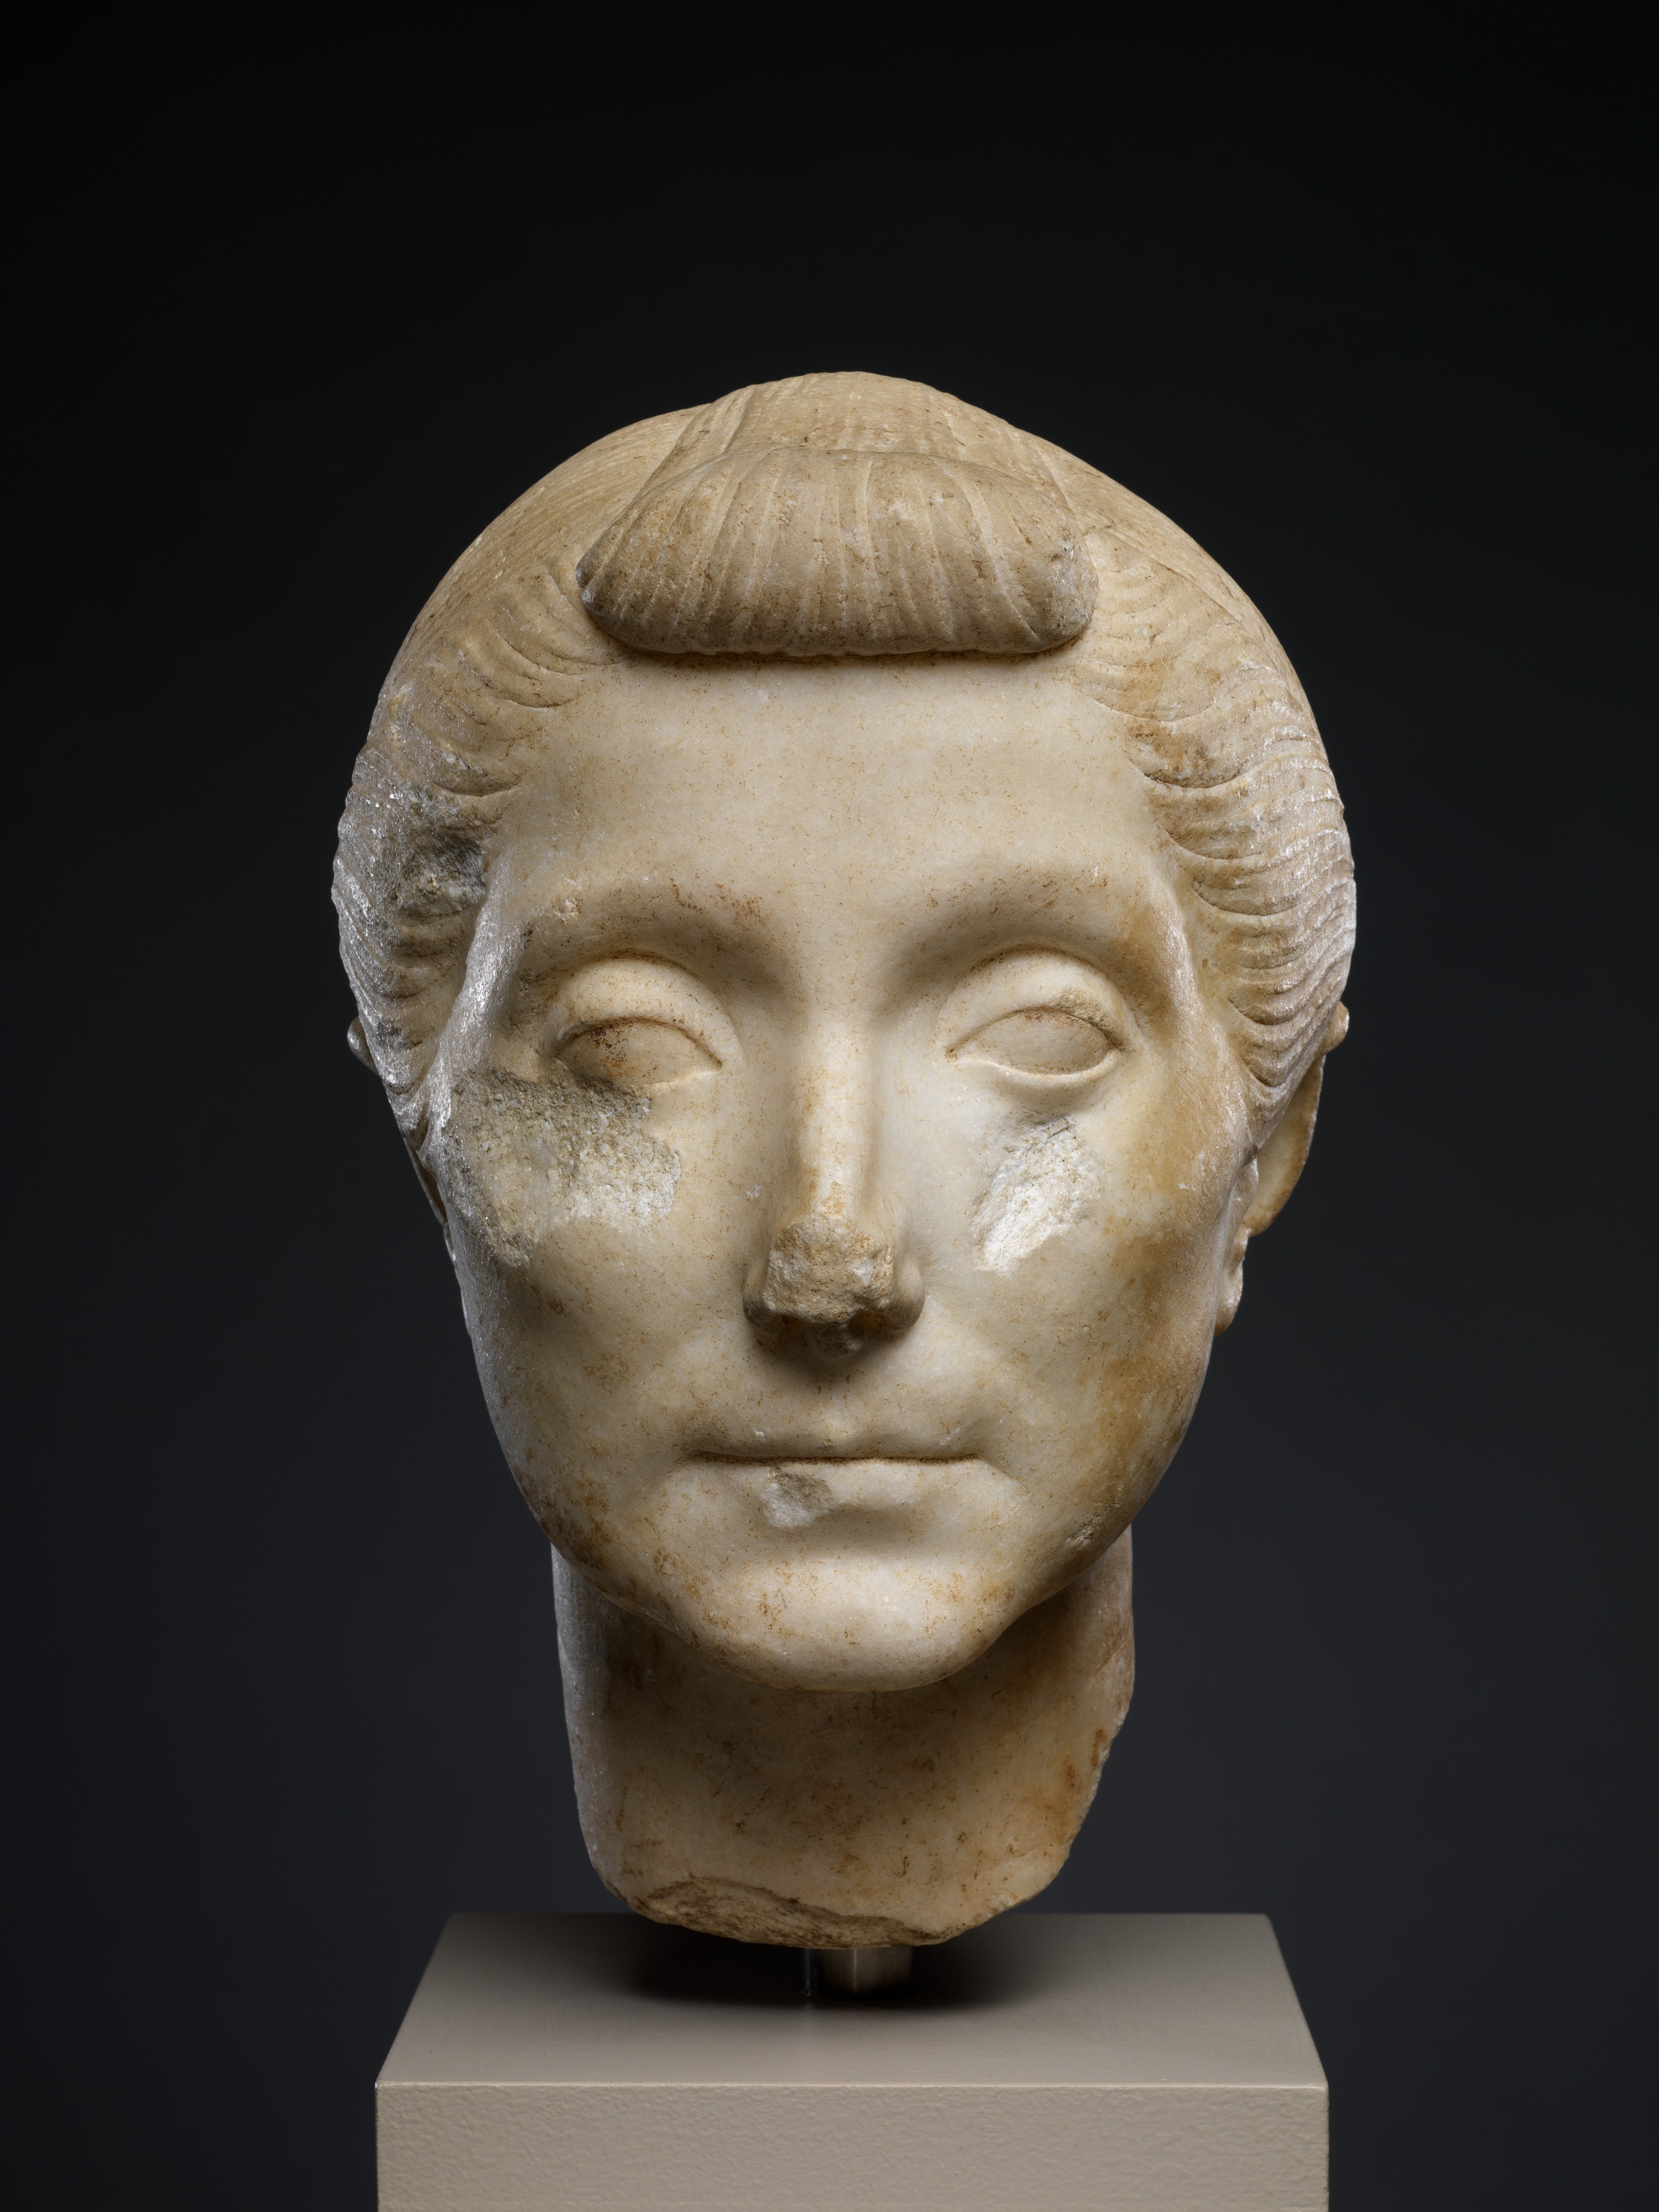 This bust of an older woman was depicted with great detail; it